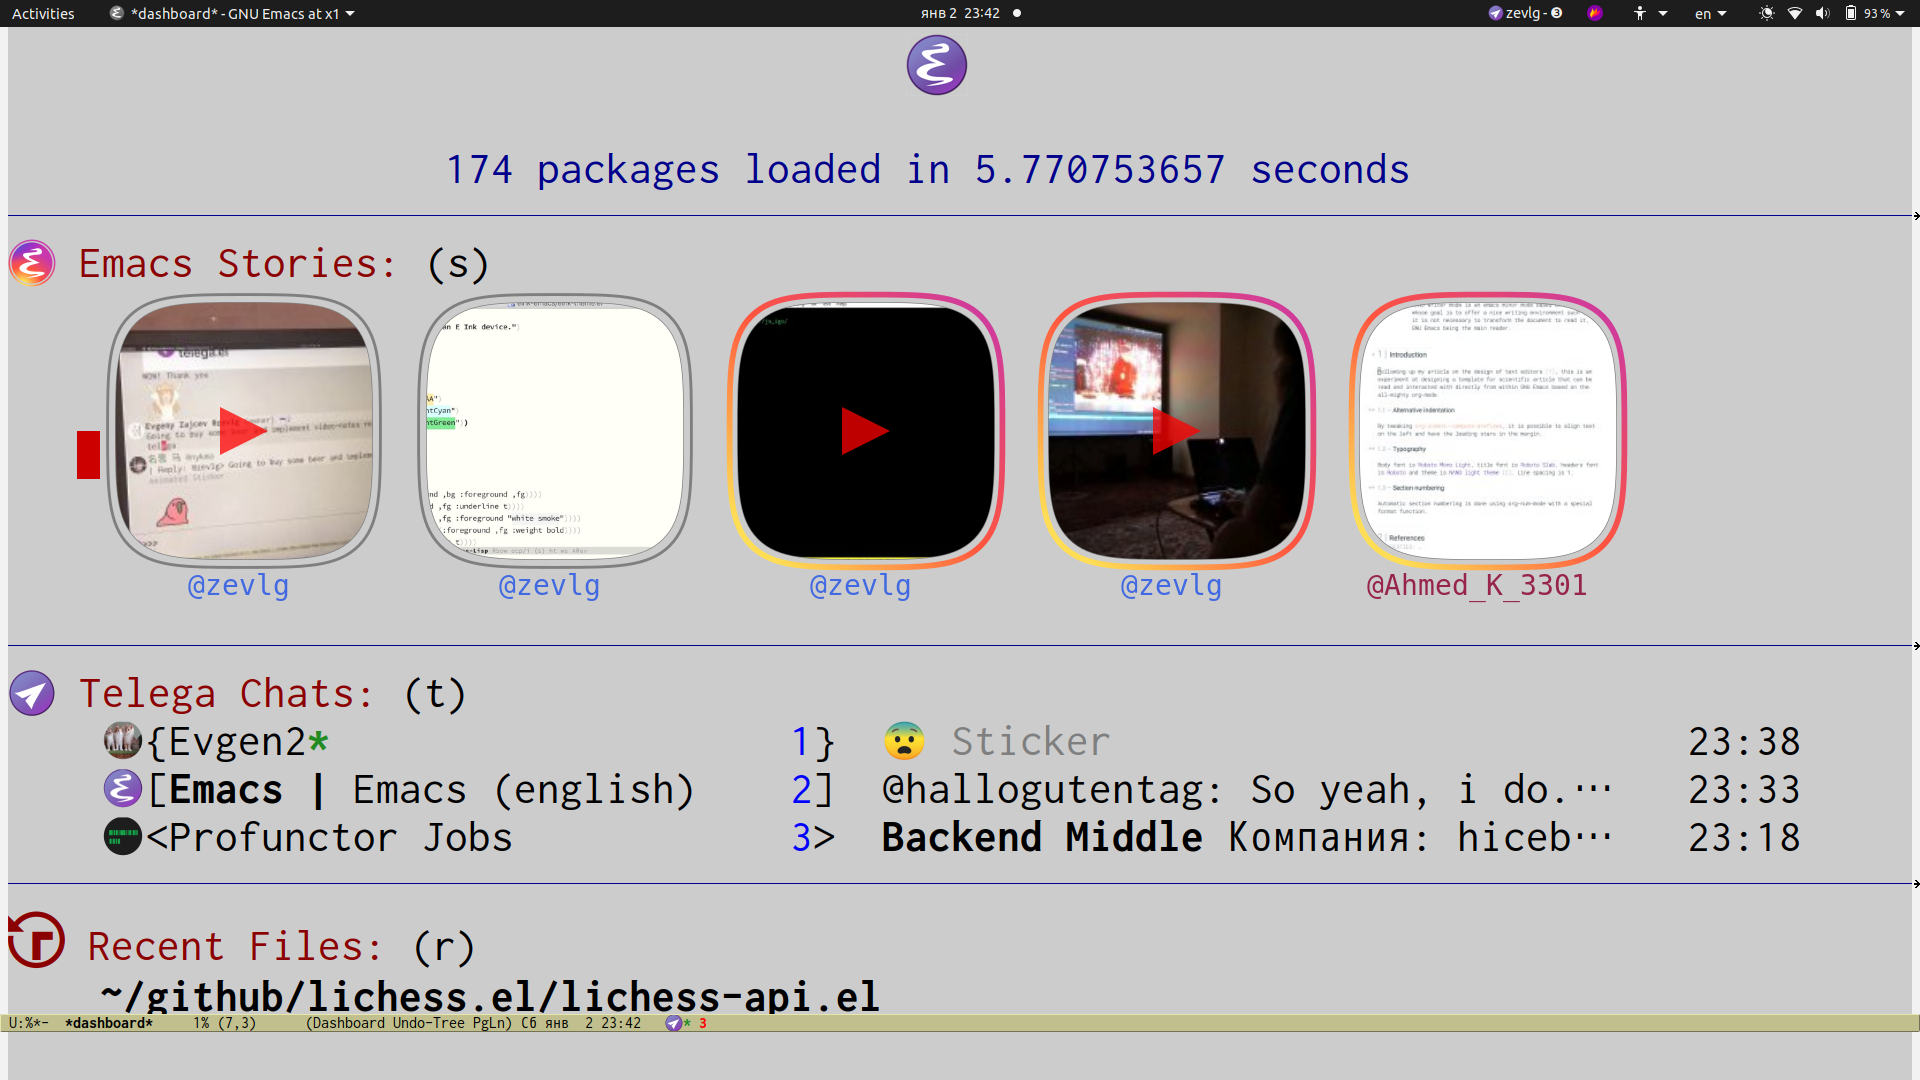 emacs-stories-dashboard.png